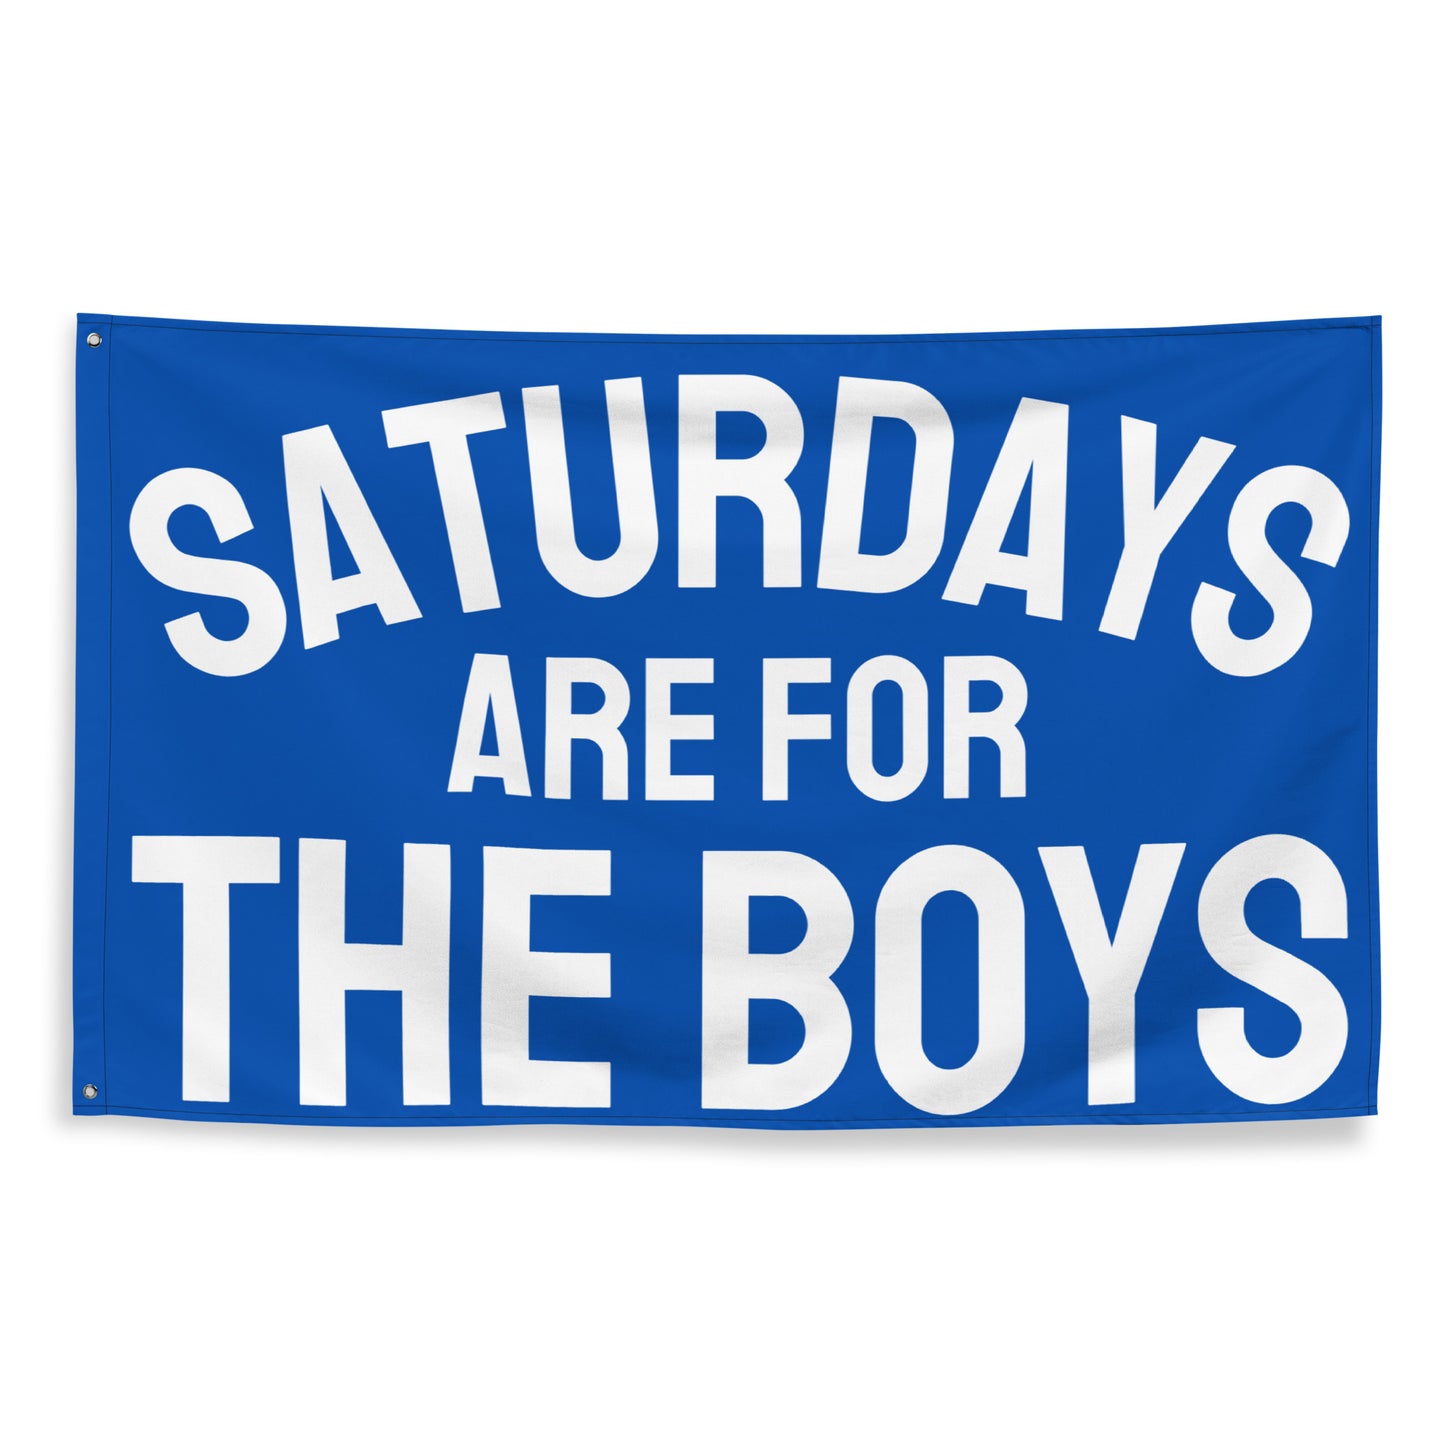 Saturdays are for the Boys, Blue Flag Banner | Gift for Him, Dorm, College, Tailgate, Decoration